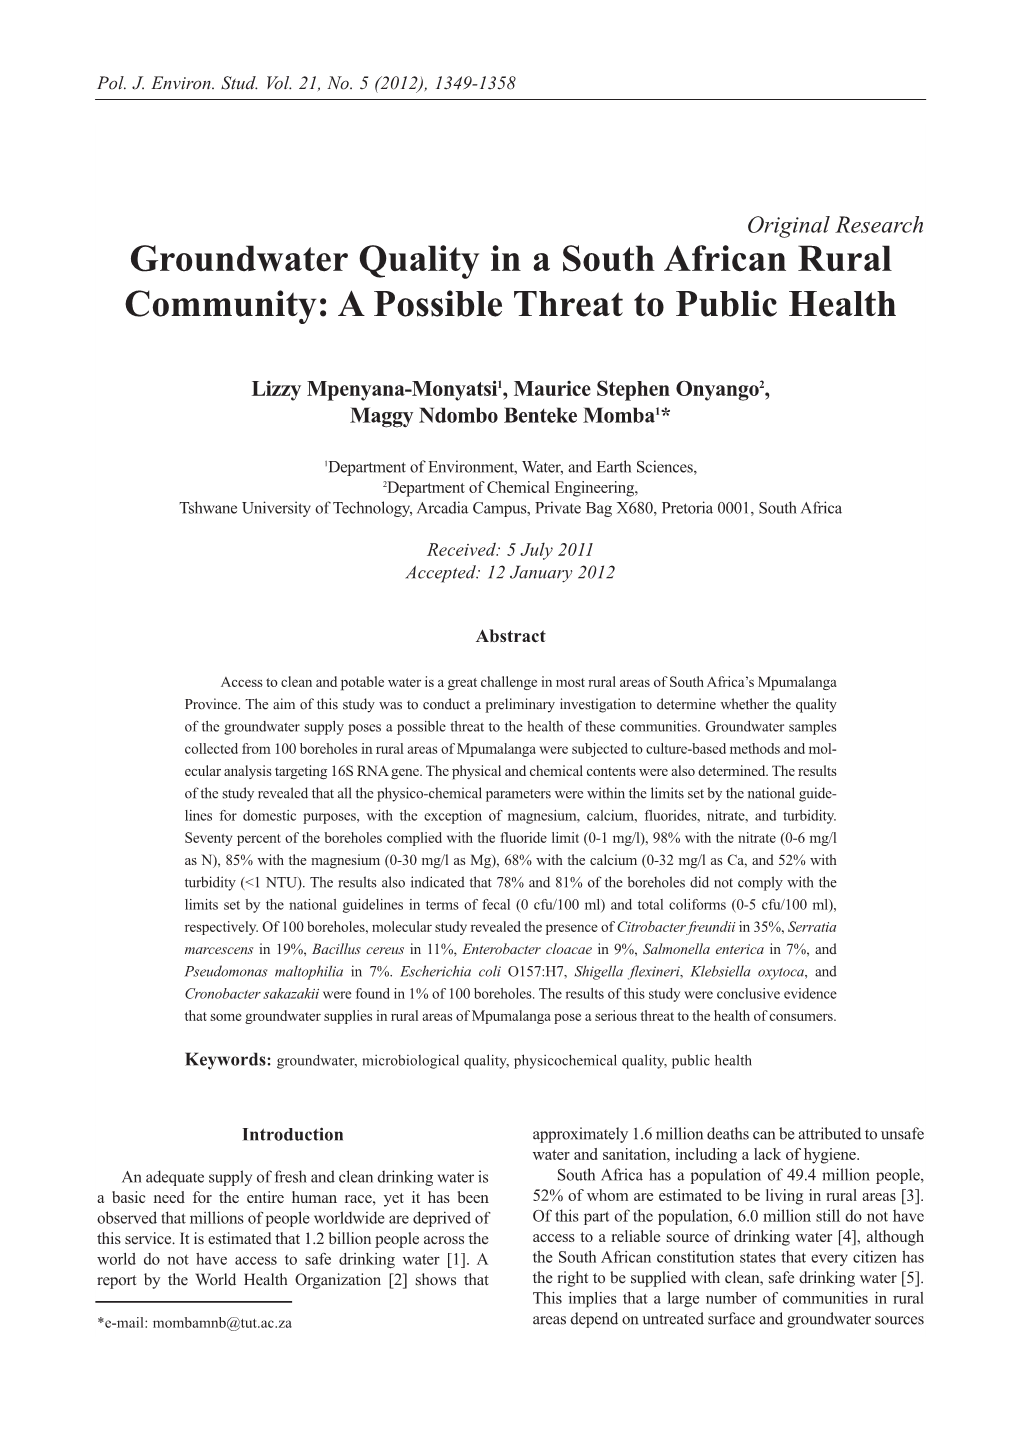 Groundwater Quality in a South African Rural Community: a Possible Threat to Public Health